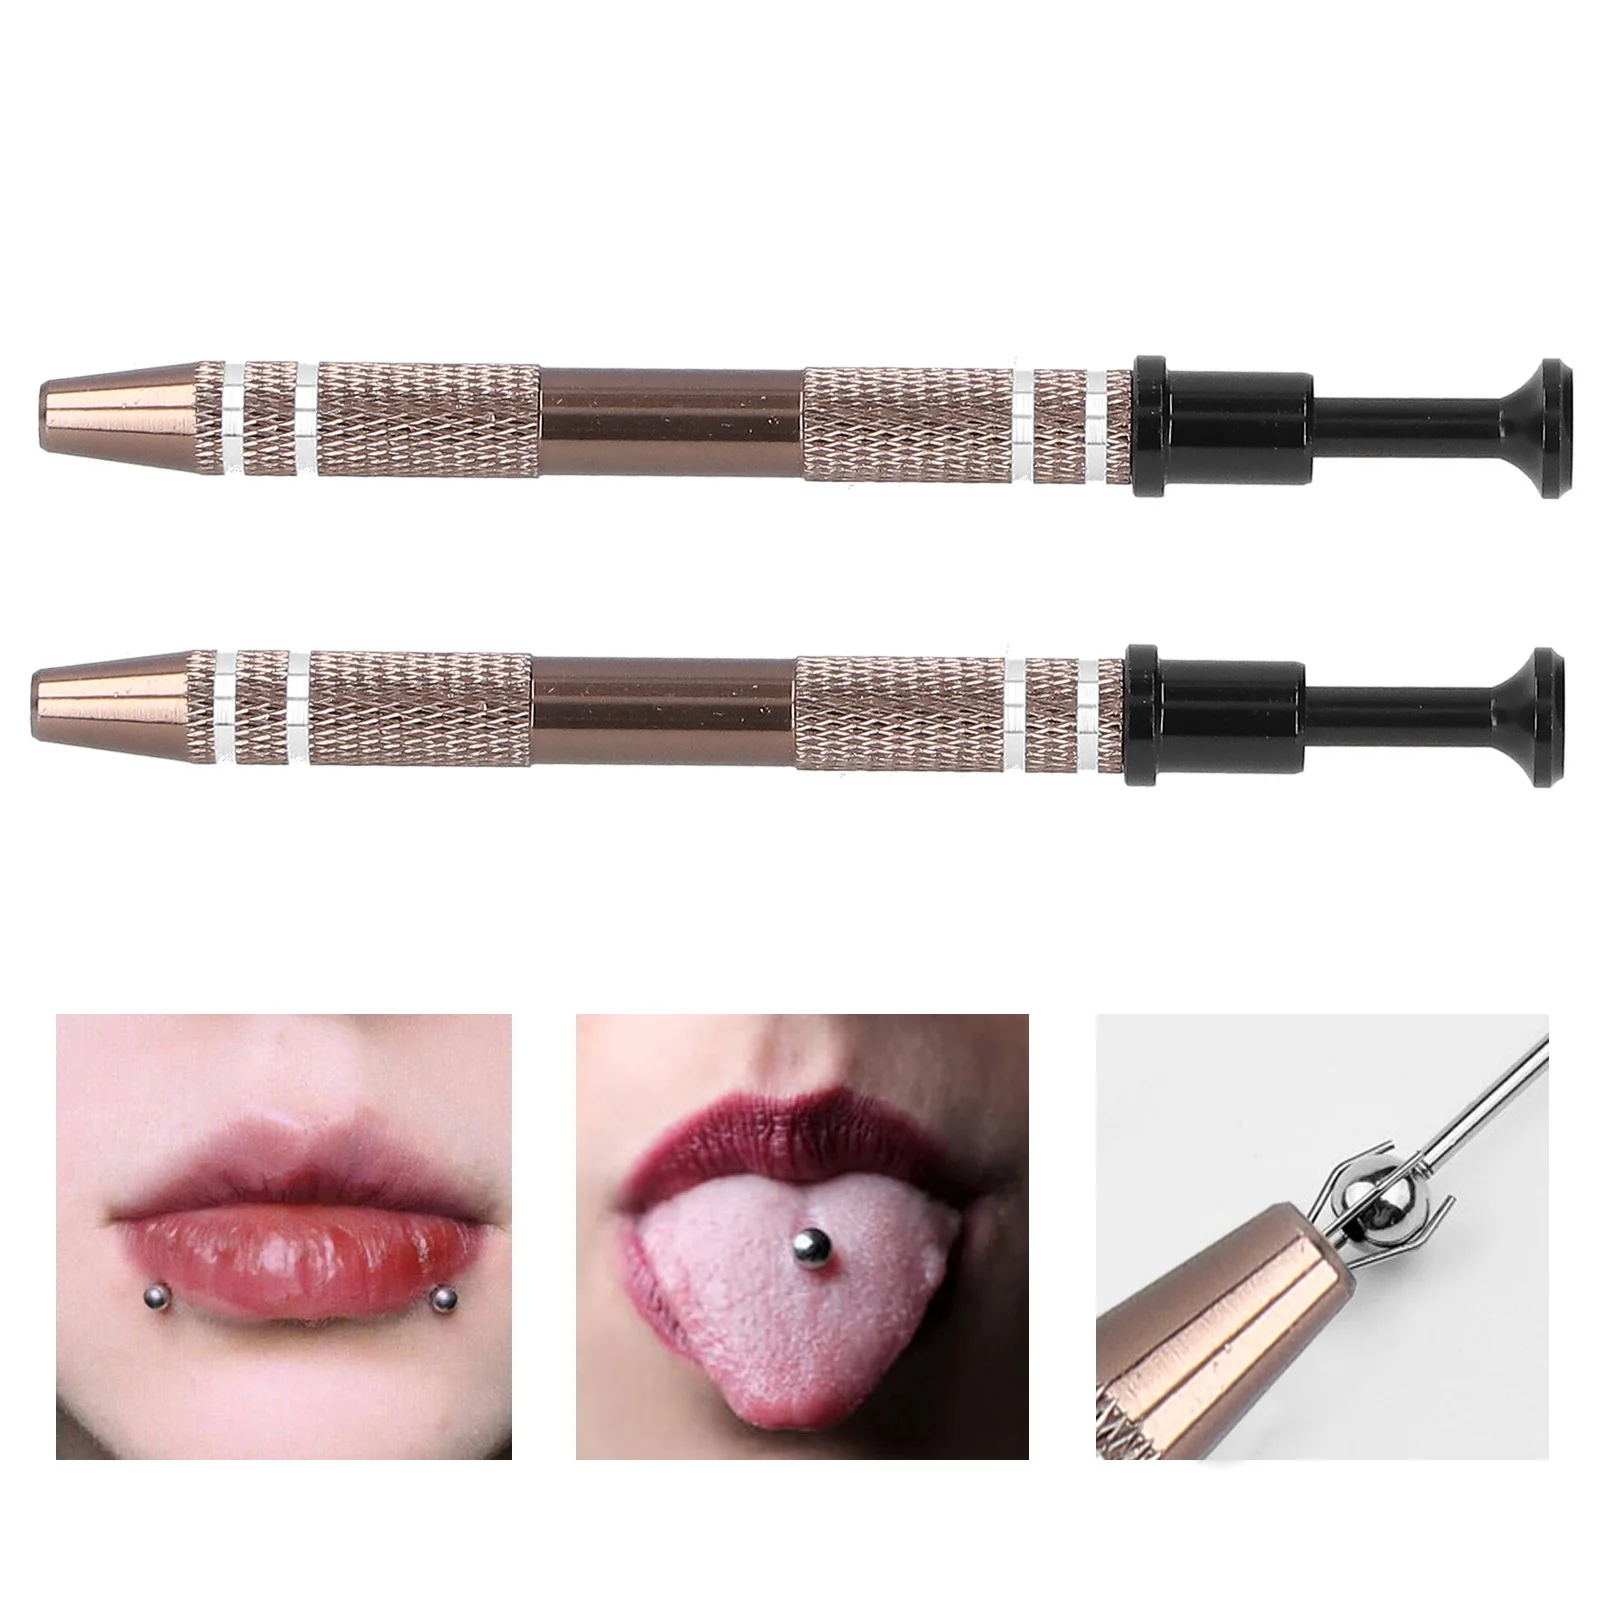 2Pcs Microblading Alloy High Precision 4 Prongs Bead Holder Jewelry Bead Grasping Pick Up Tool Body Tattoo Piercing Accessories stainless steel gold jewelry tweezer grabber tools bead gem holder pick up tool